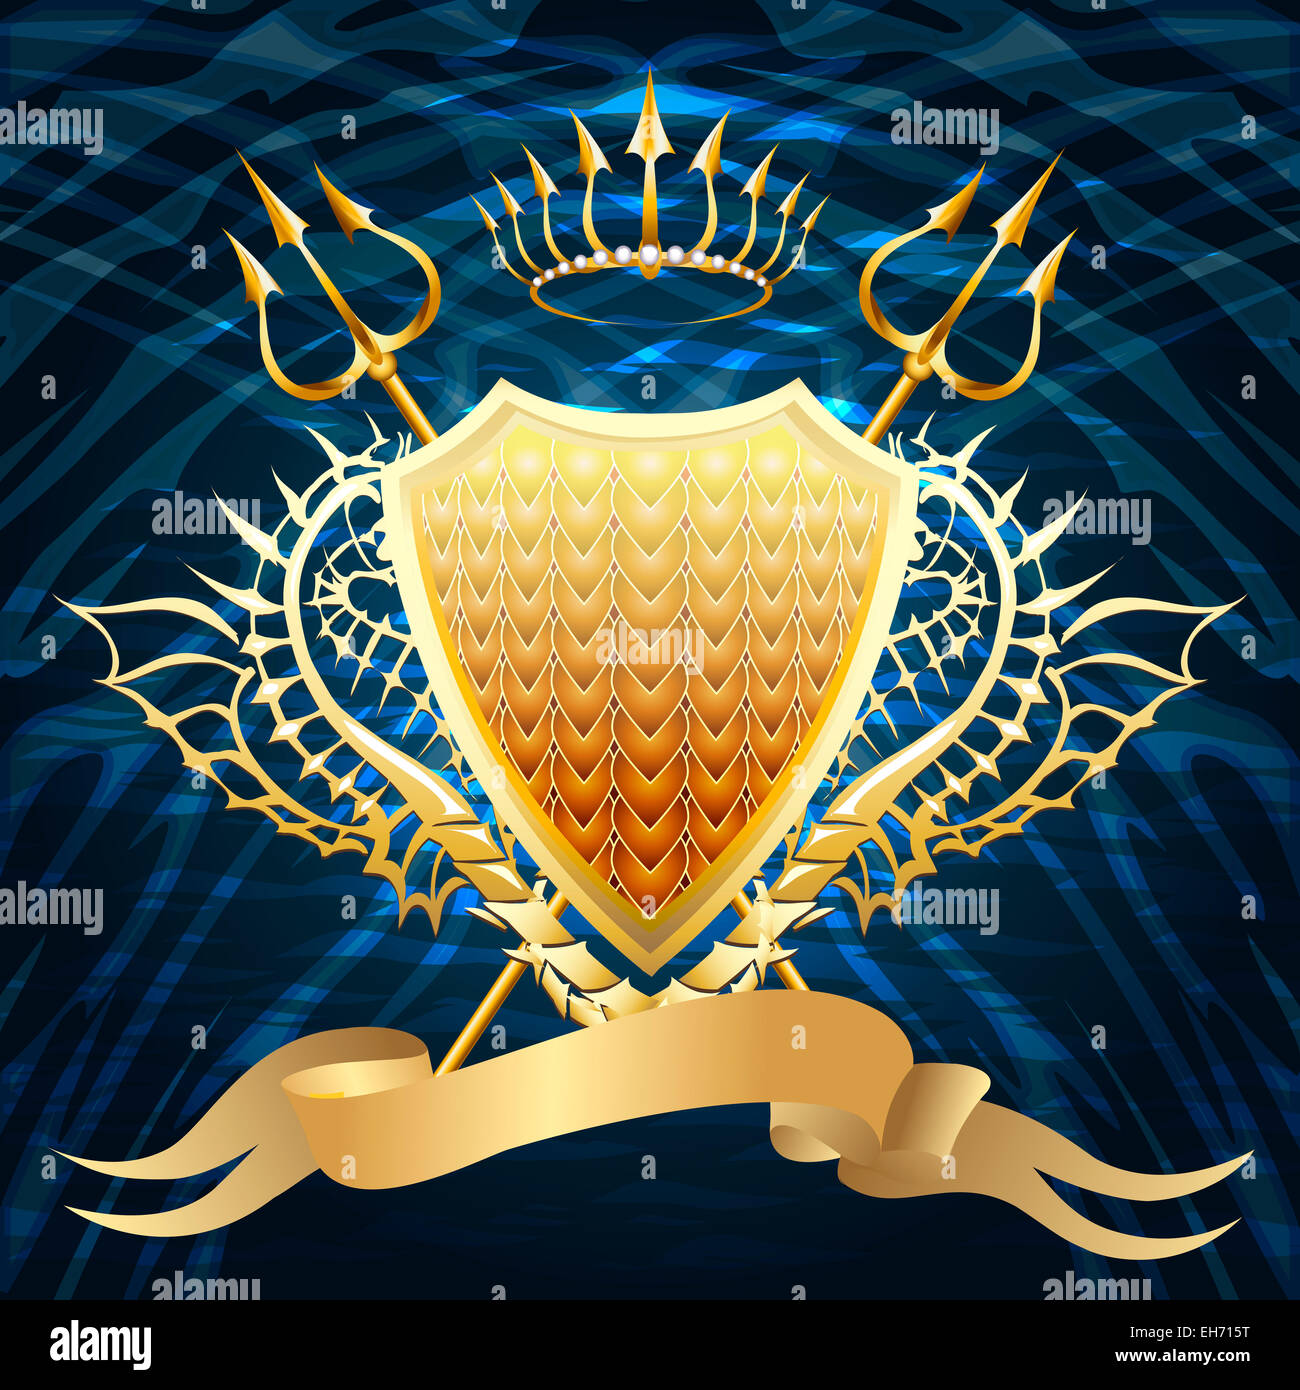 The golden shield with two tridents, crown and banner against dark blue wavy background drawn in classic style Stock Photo